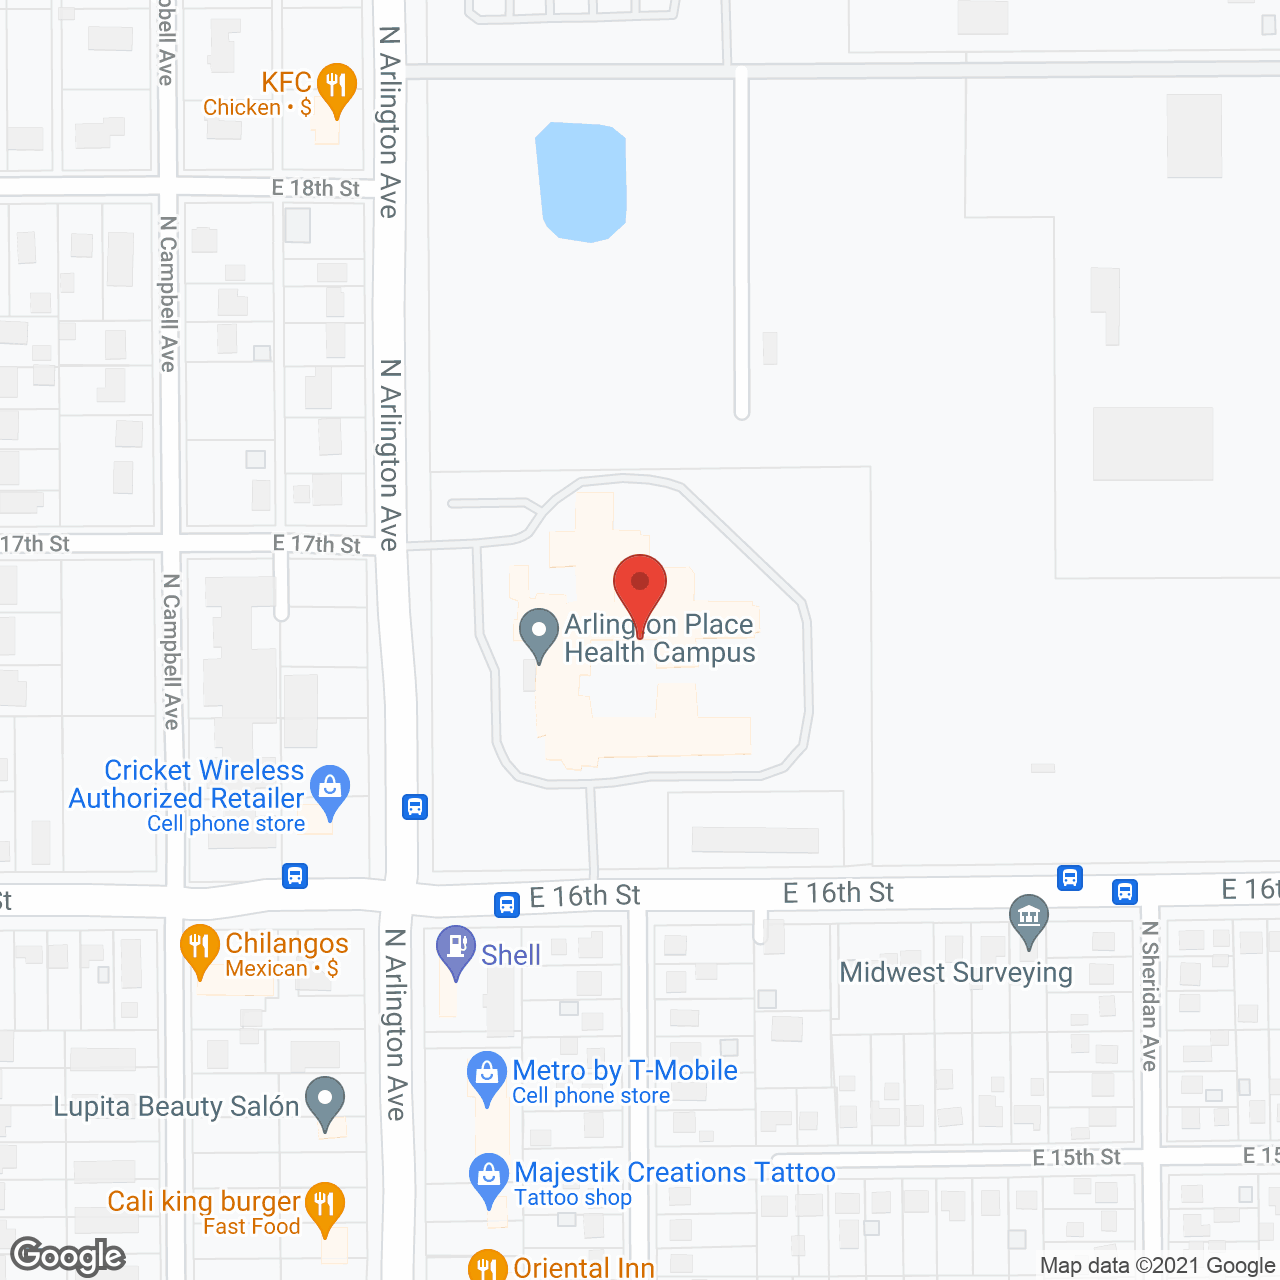 Arlington Place Health Campus in google map